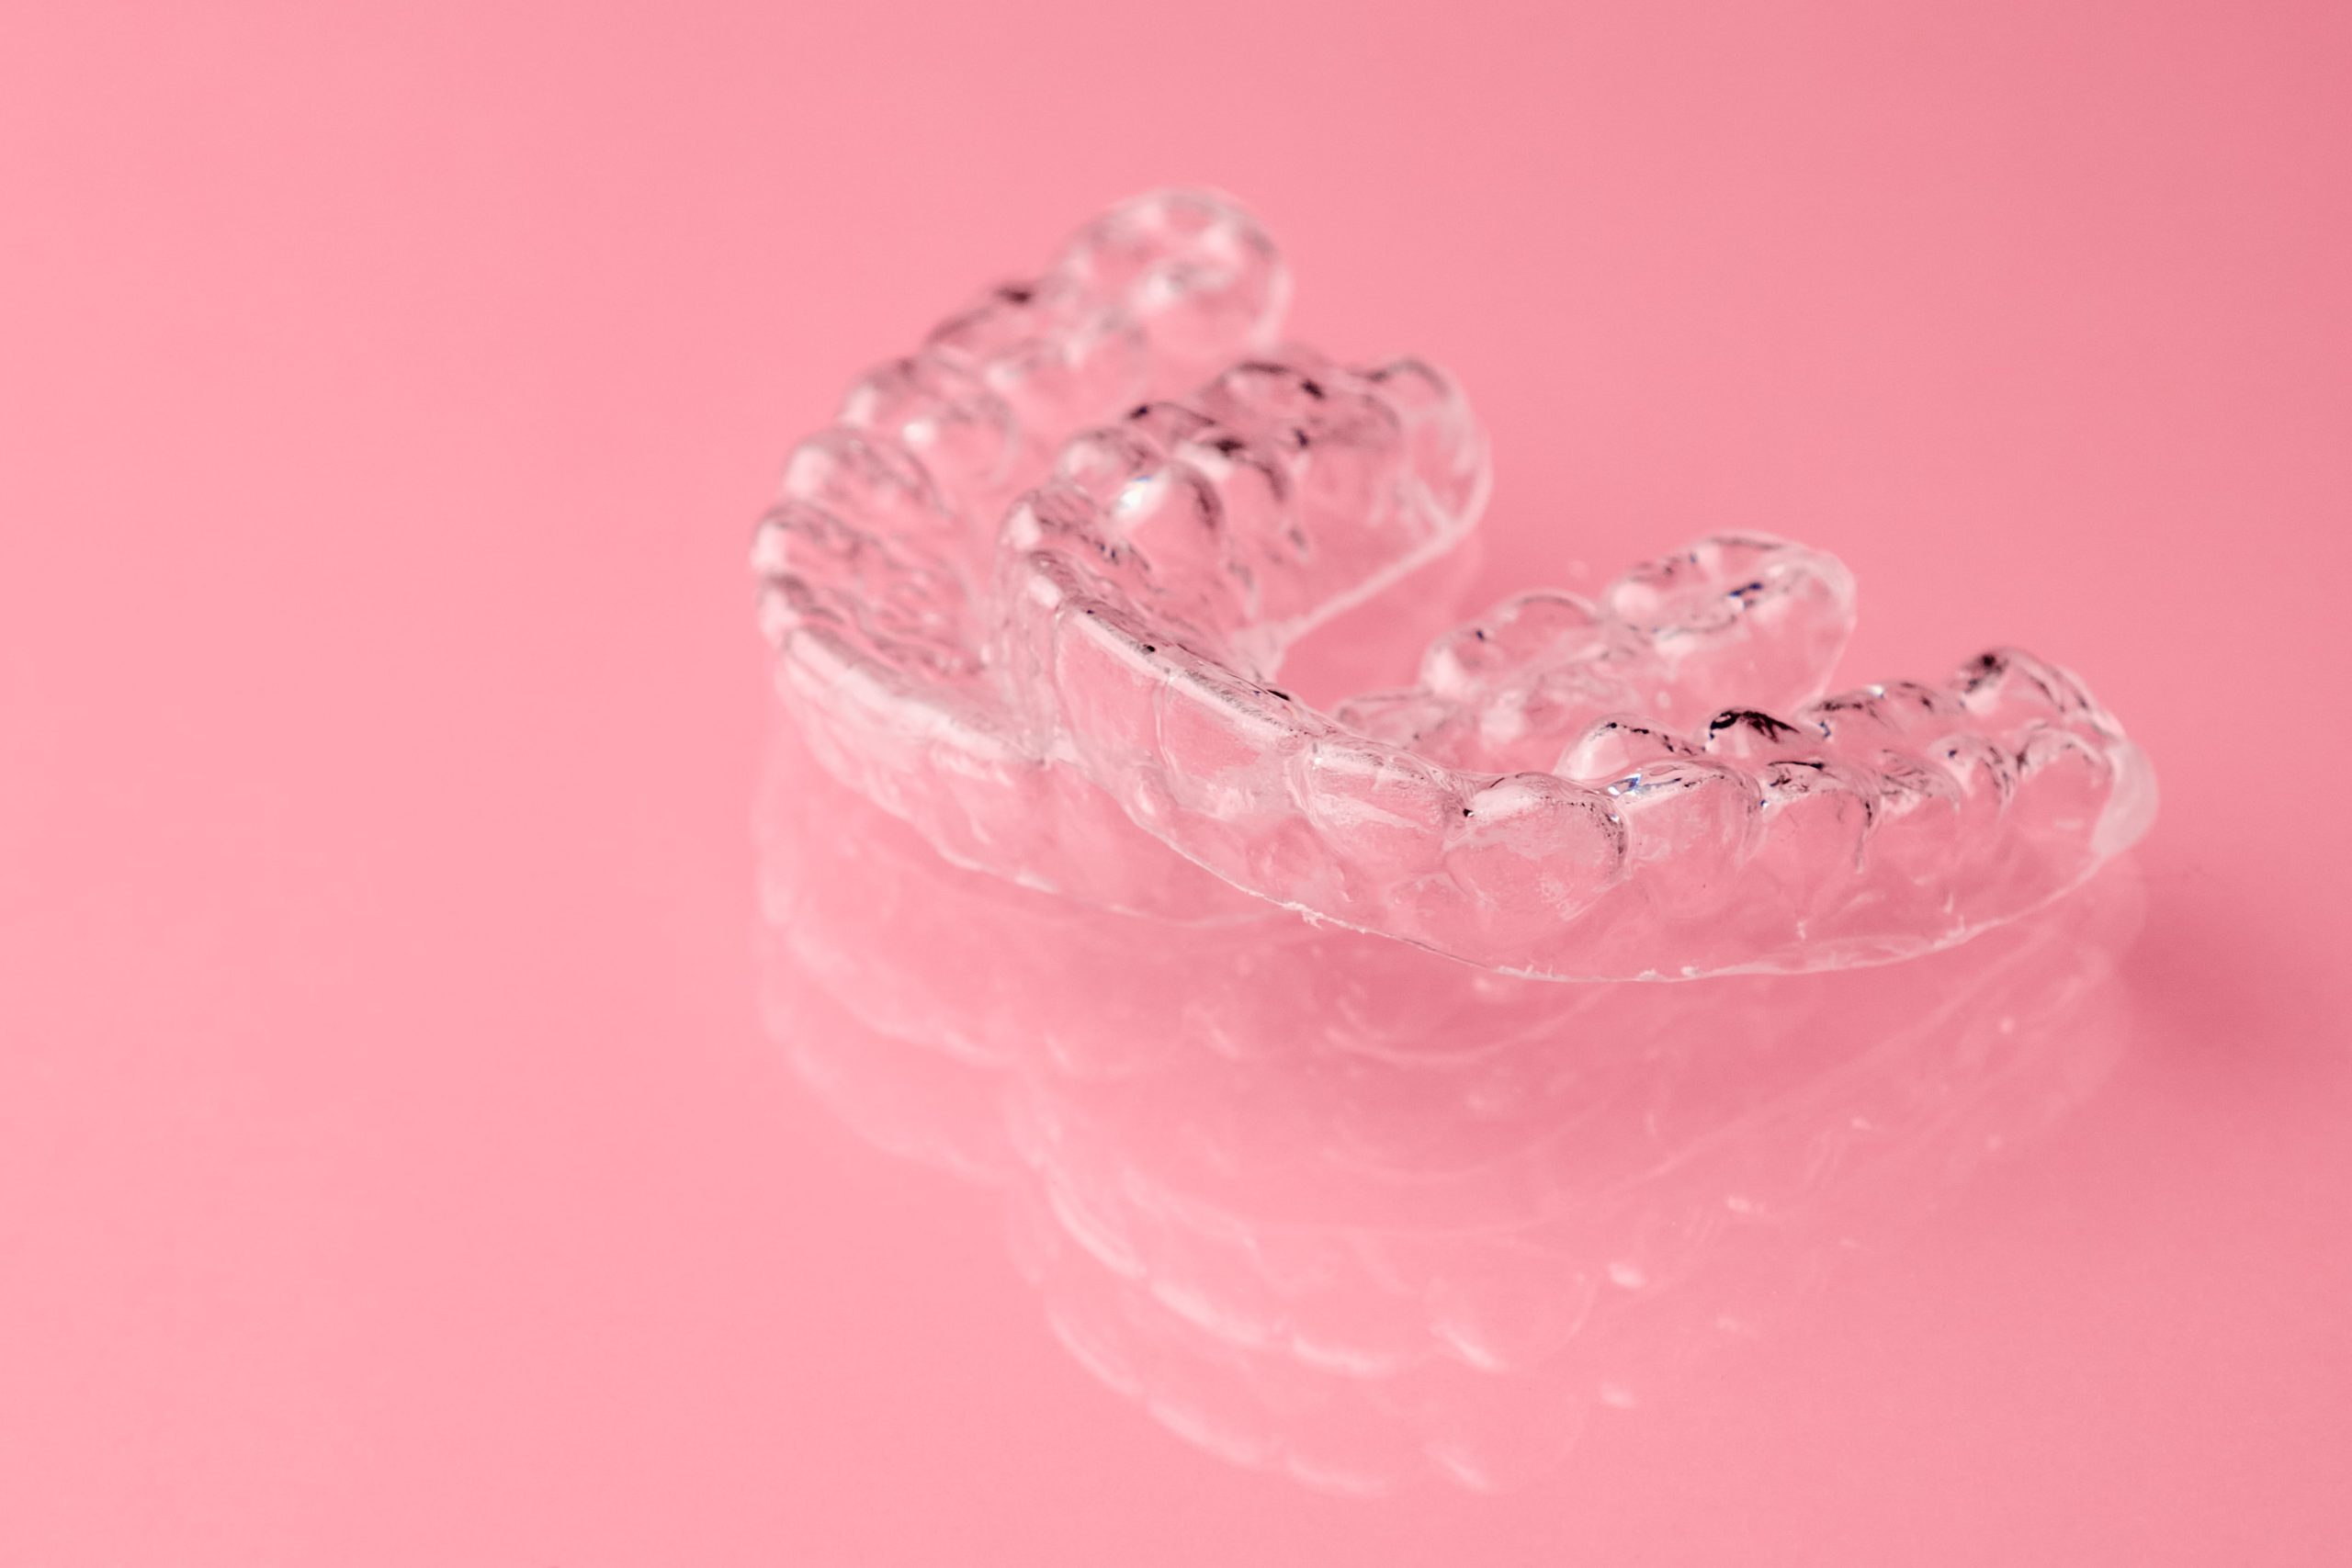 two removable braces sitting on pink background